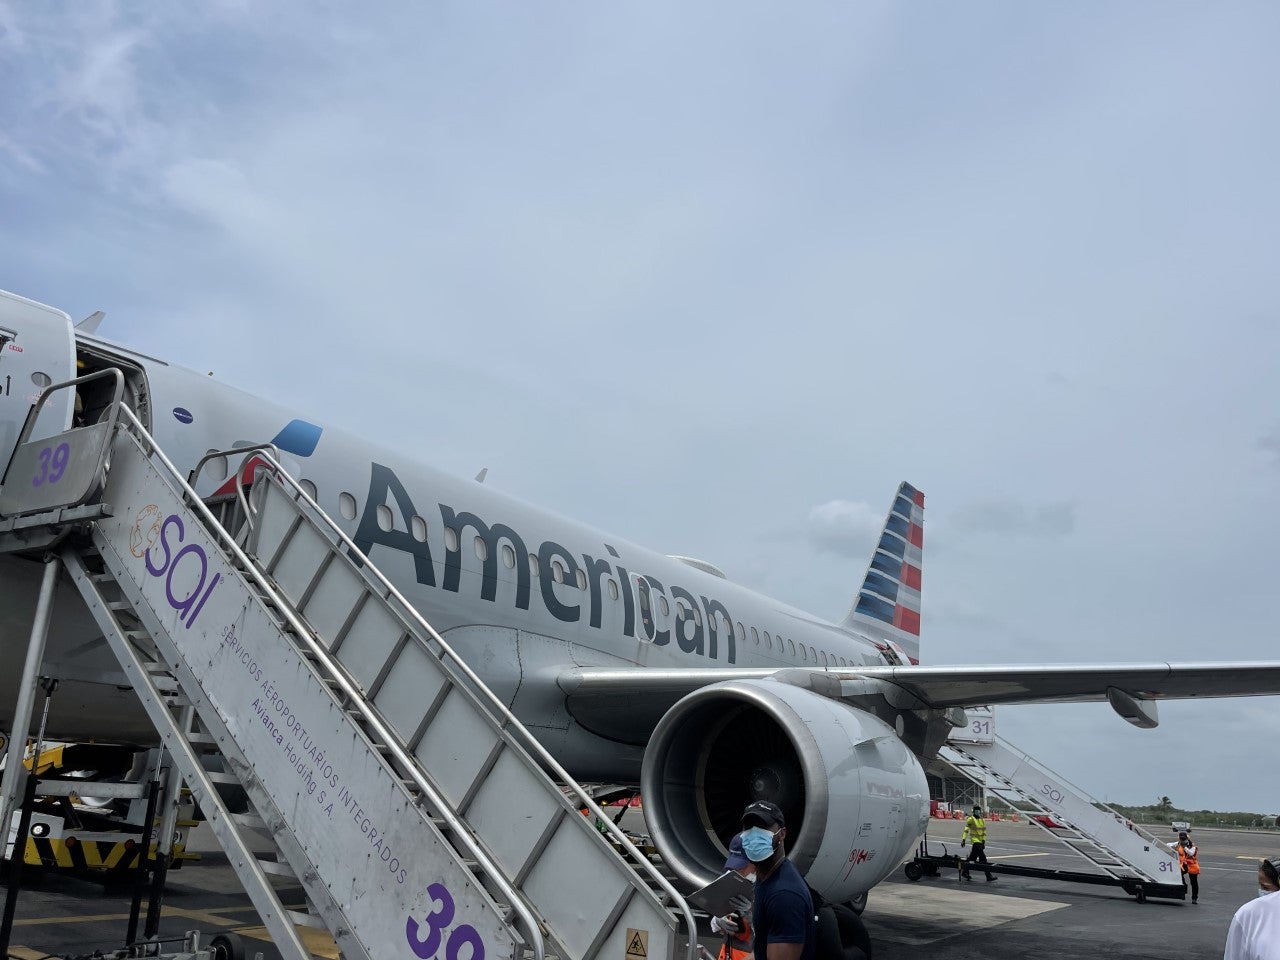 Be careful: 9 times you won’t earn American Airlines Loyalty Points, even if you earn miles - The Points Guy